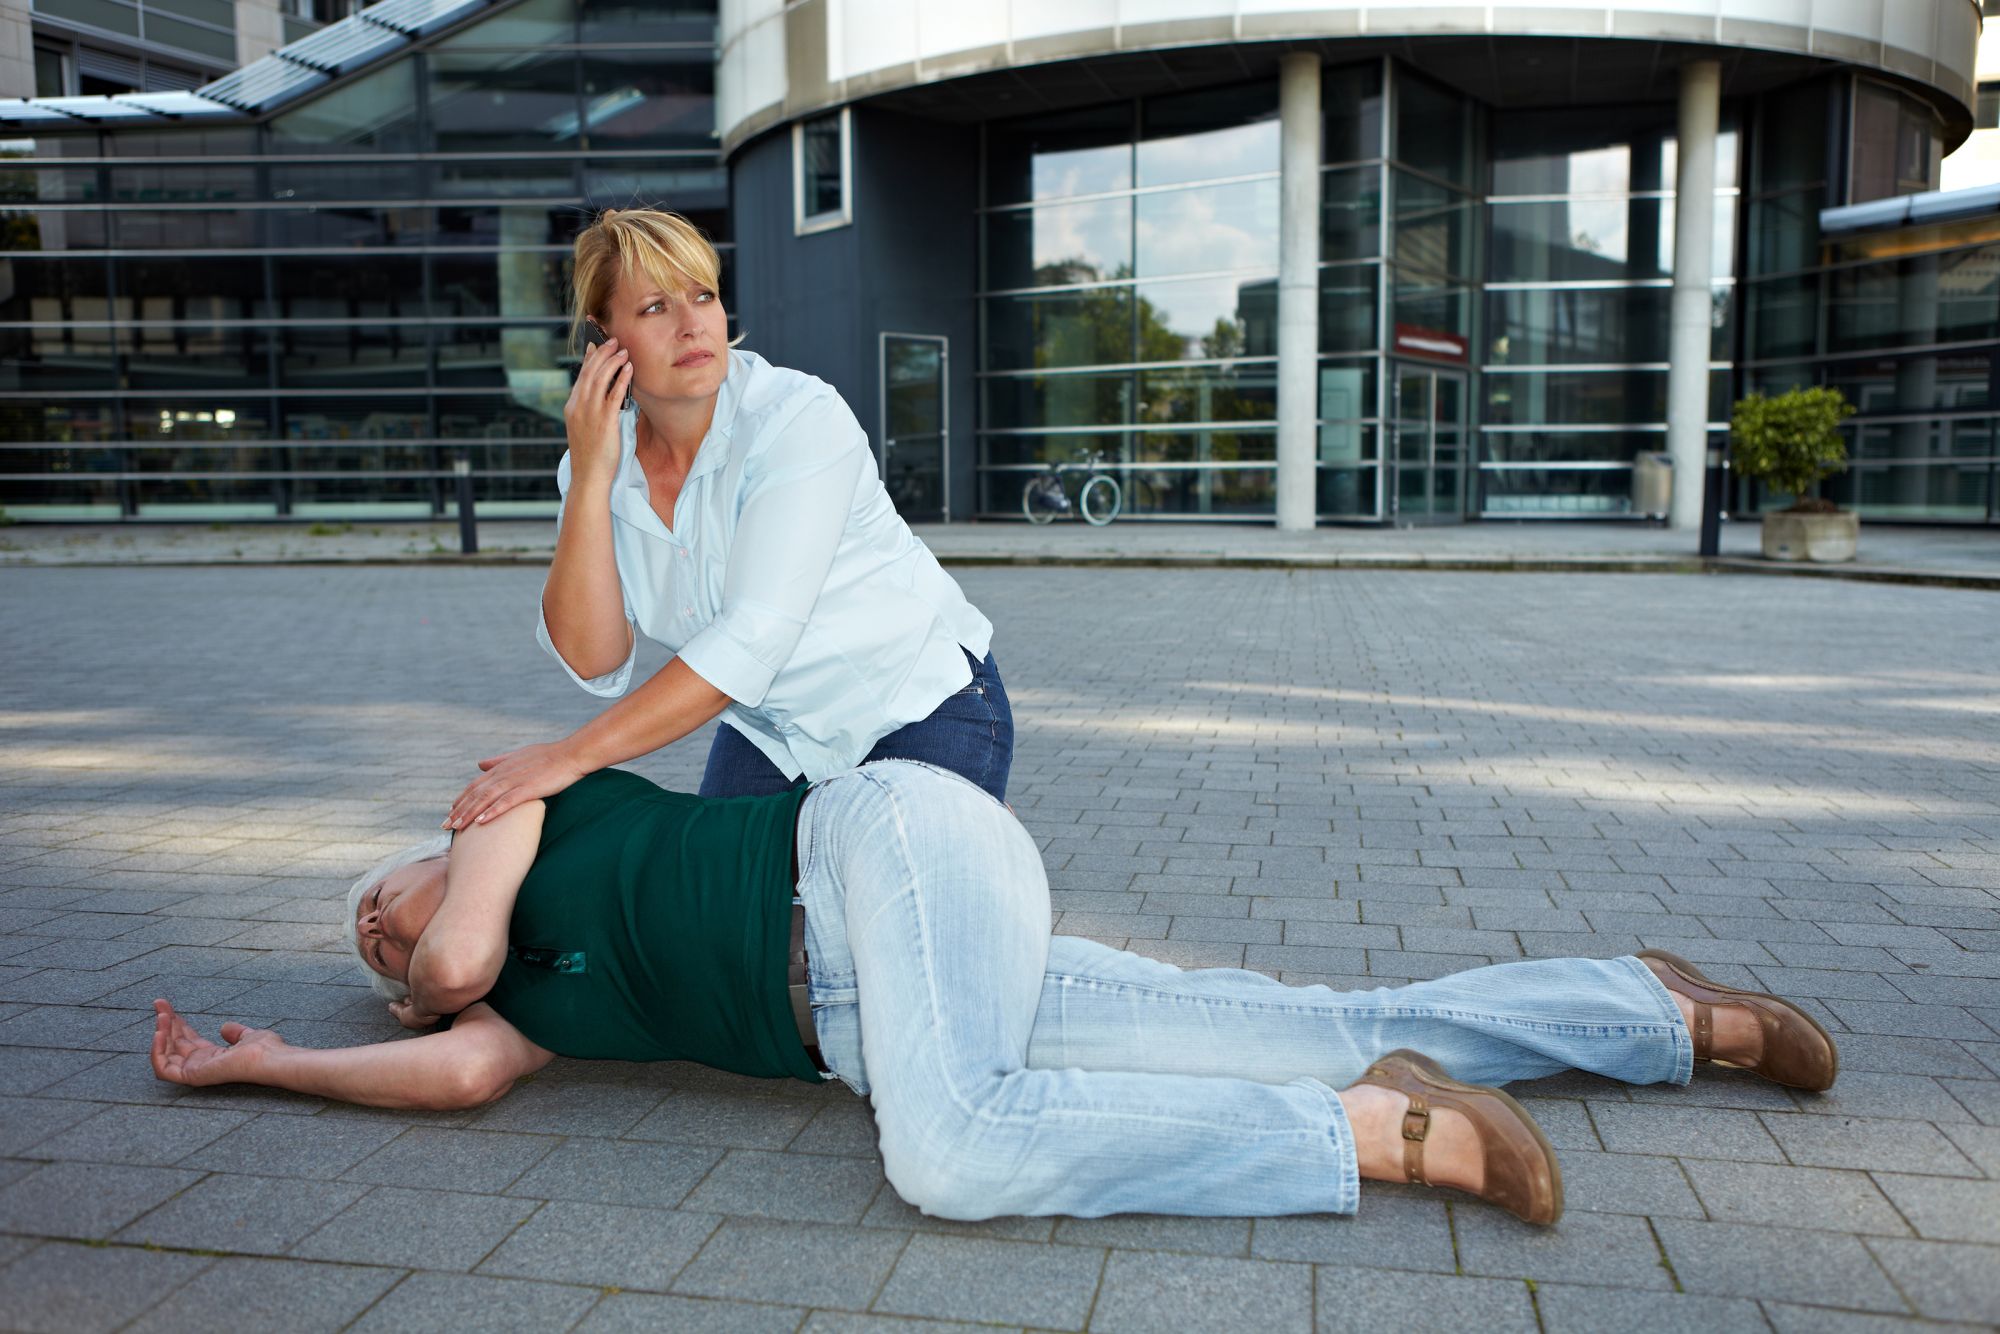 fainting-Passerby-Making-Emergency-Call-23636249